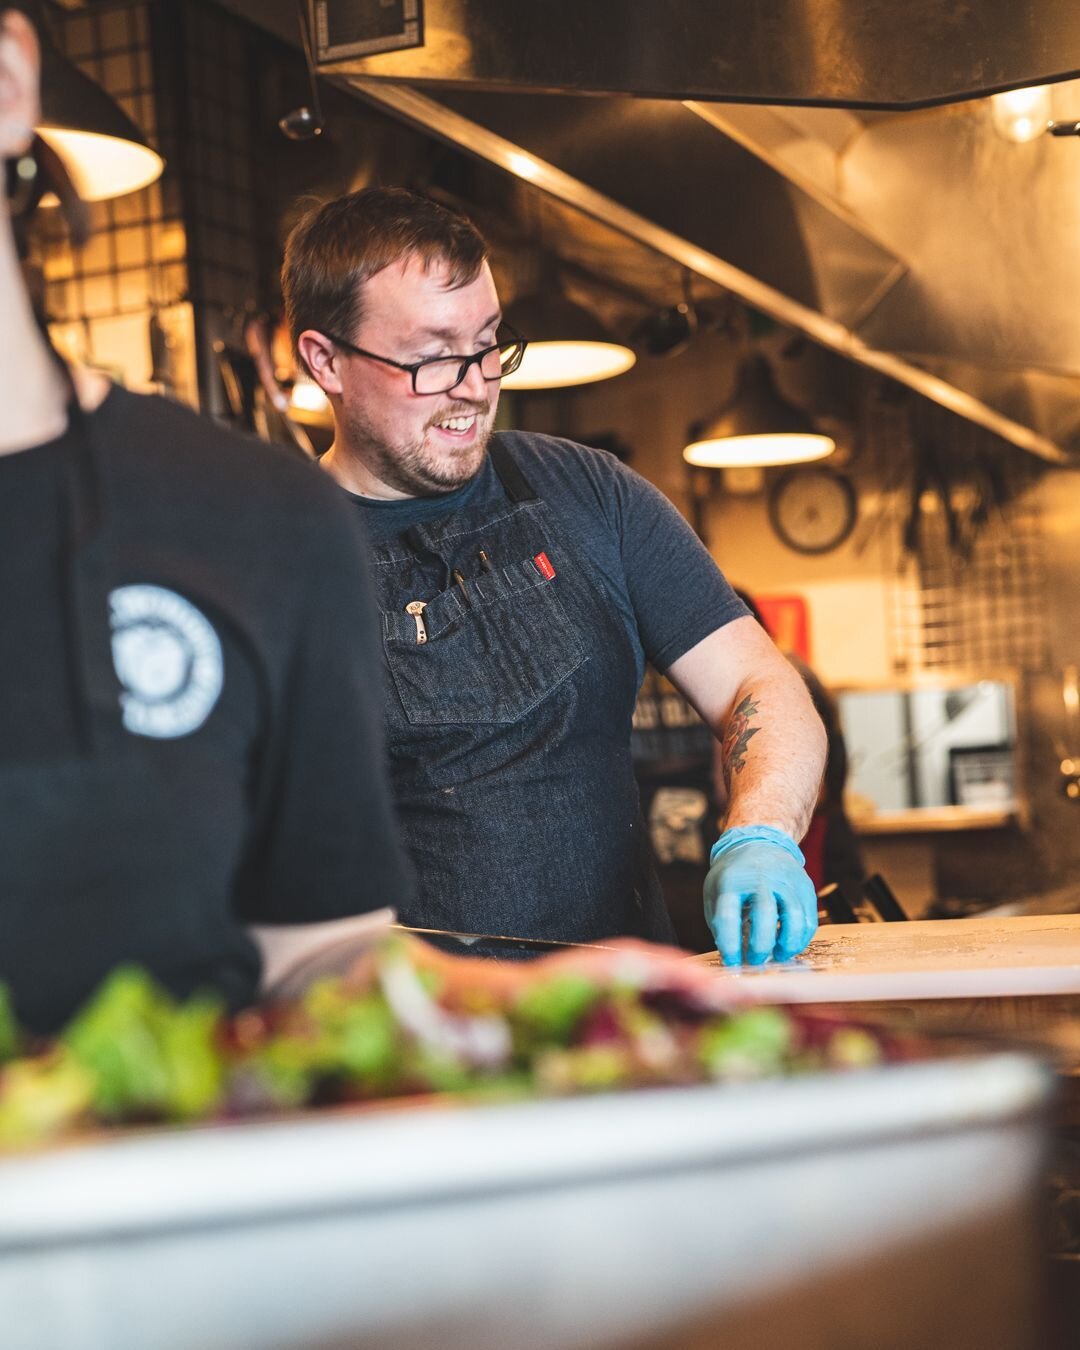 Everyone say hi to Chef Casey from @dollyolivepdx! 👋

Casey got his start in restaurants working as a dishwasher/pizza cook when he was 15. He moved to Keene, New Hampshire for college and fell in love with the fine dining industry. He moved to Port